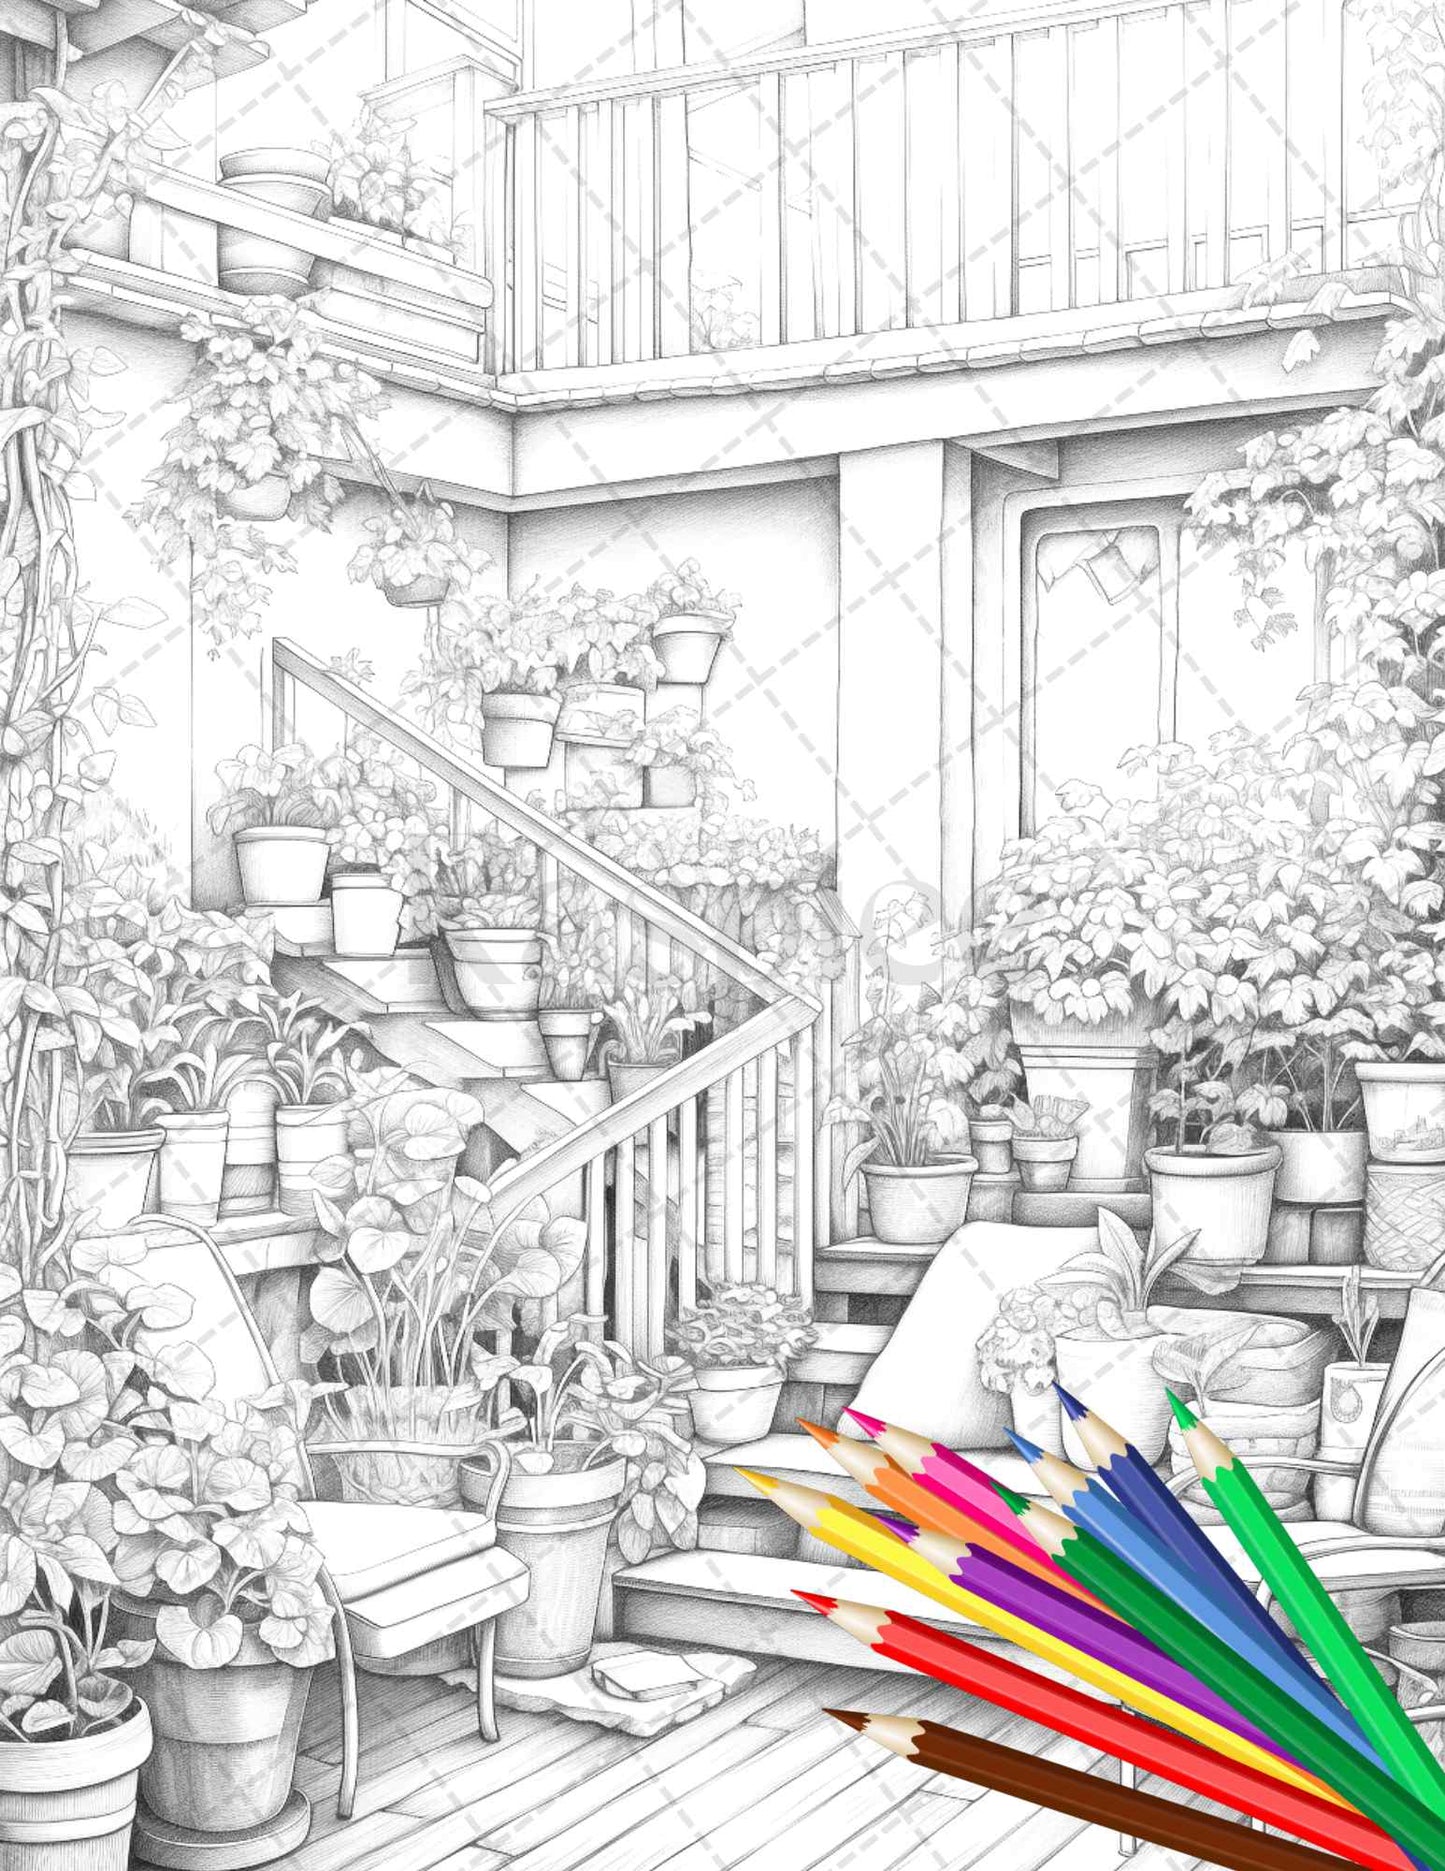 Balcony garden grayscale coloring page, Printable coloring page for adults ,Relaxing grayscale artwork ,Detailed botanical coloring design, Charming outdoor-themed coloring page